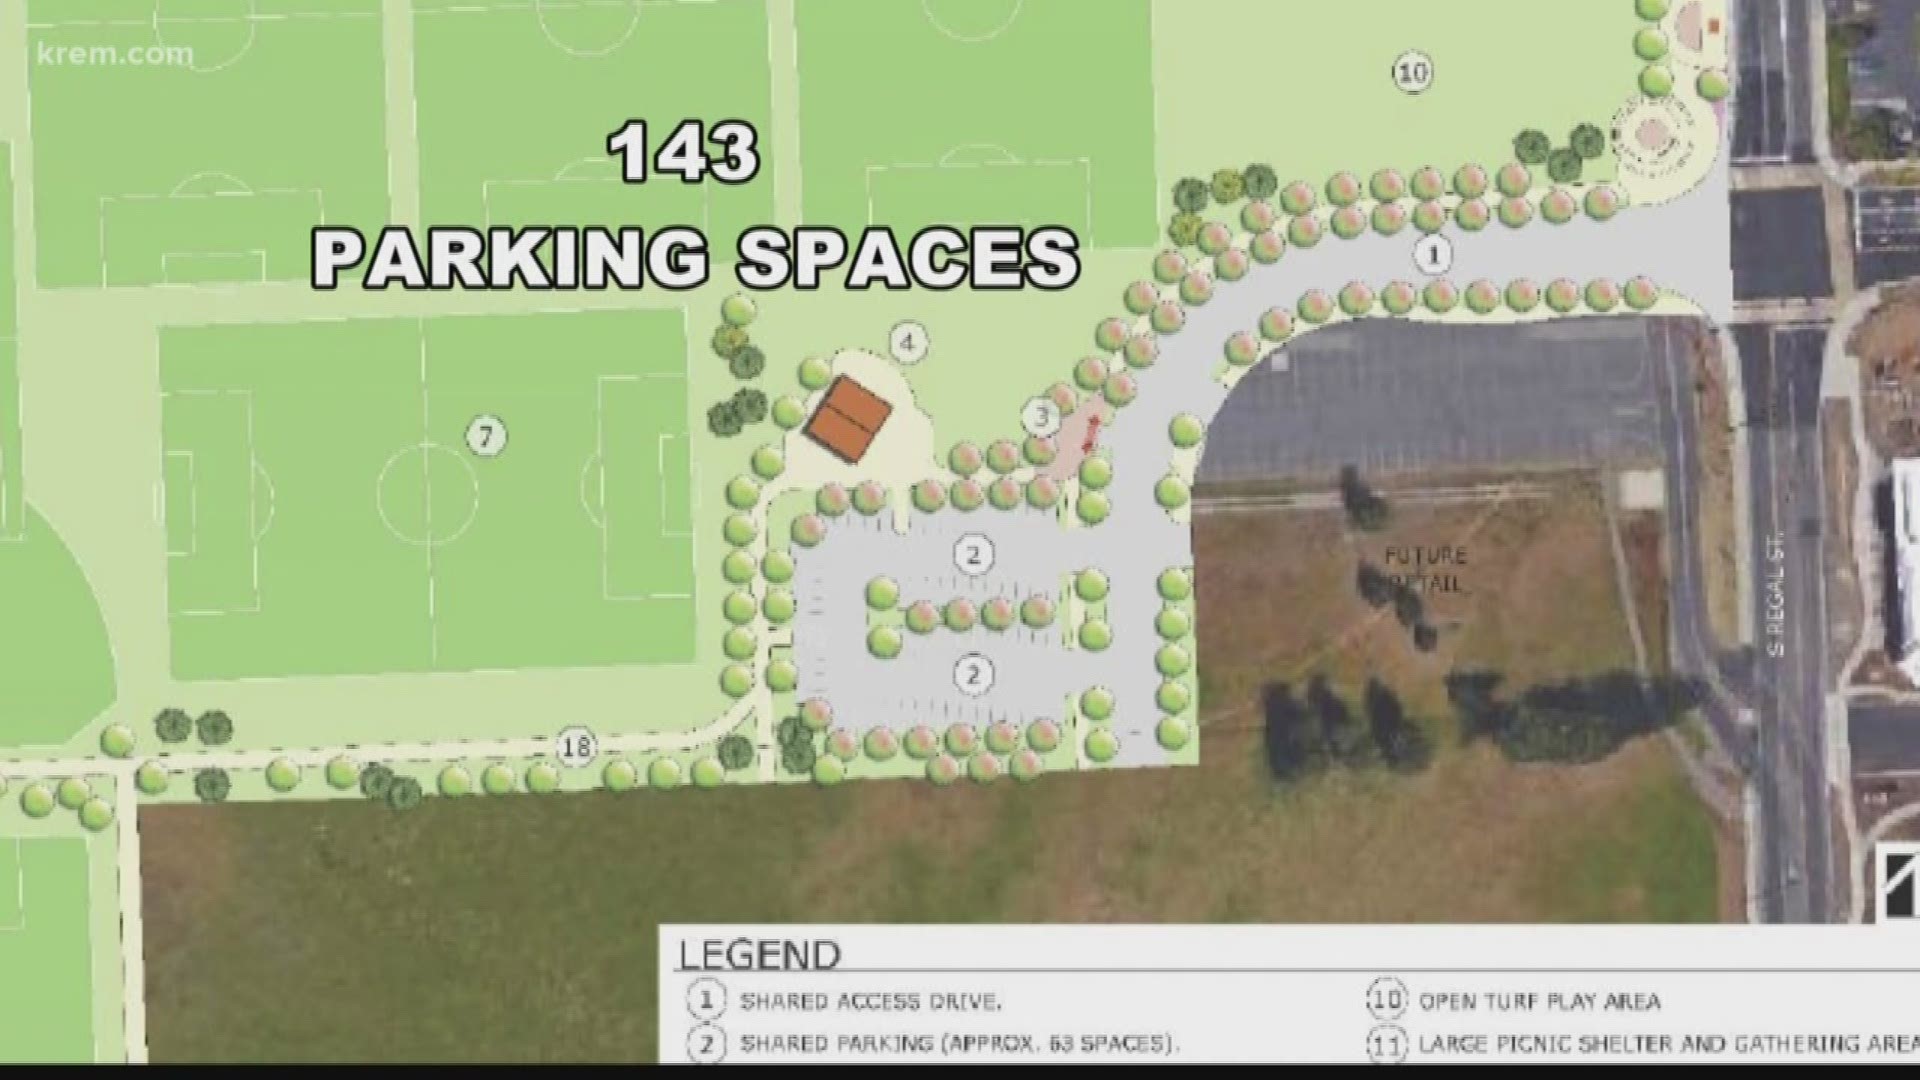 City parks looking for resident input ahead of Southeast sports complex face lift